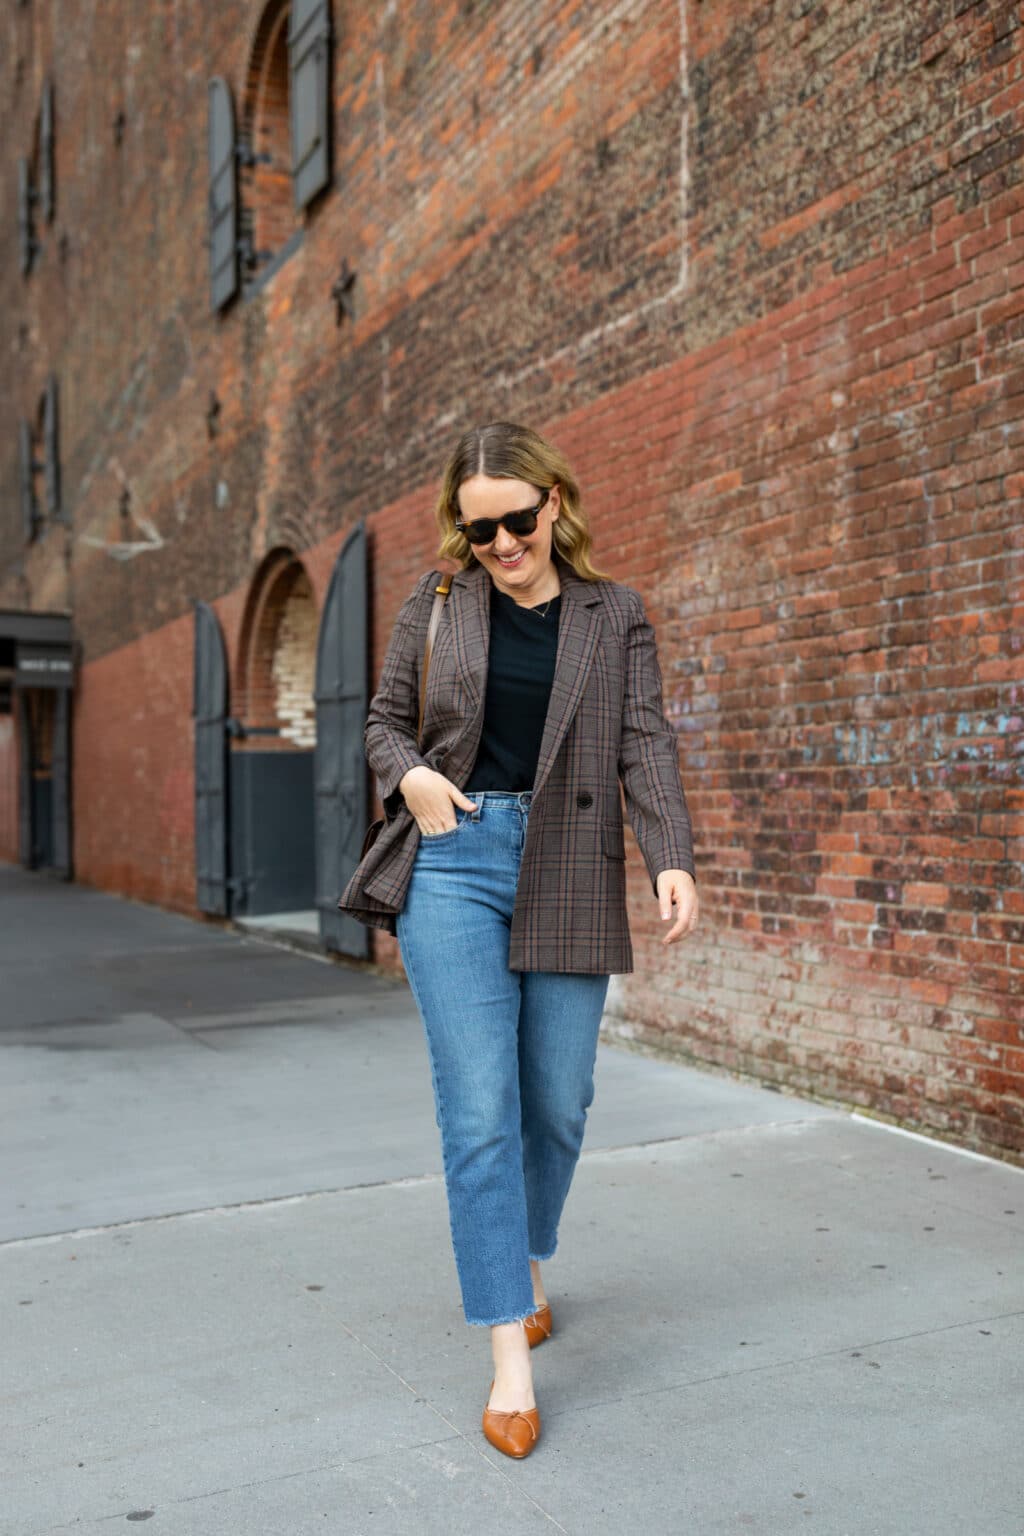 Casual Fall Outfit Ideas With Jeans - wit & whimsy